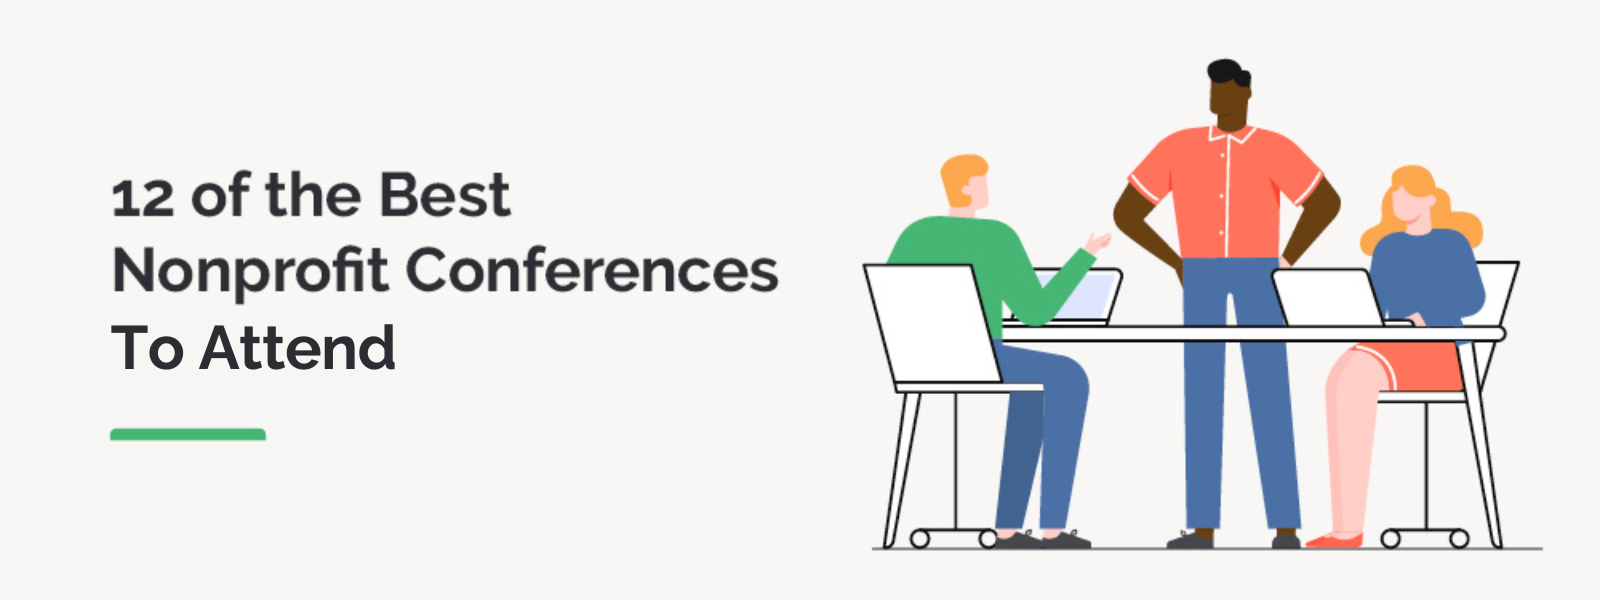 This guide reviews 12 of the best nonprofit conferences to attend.